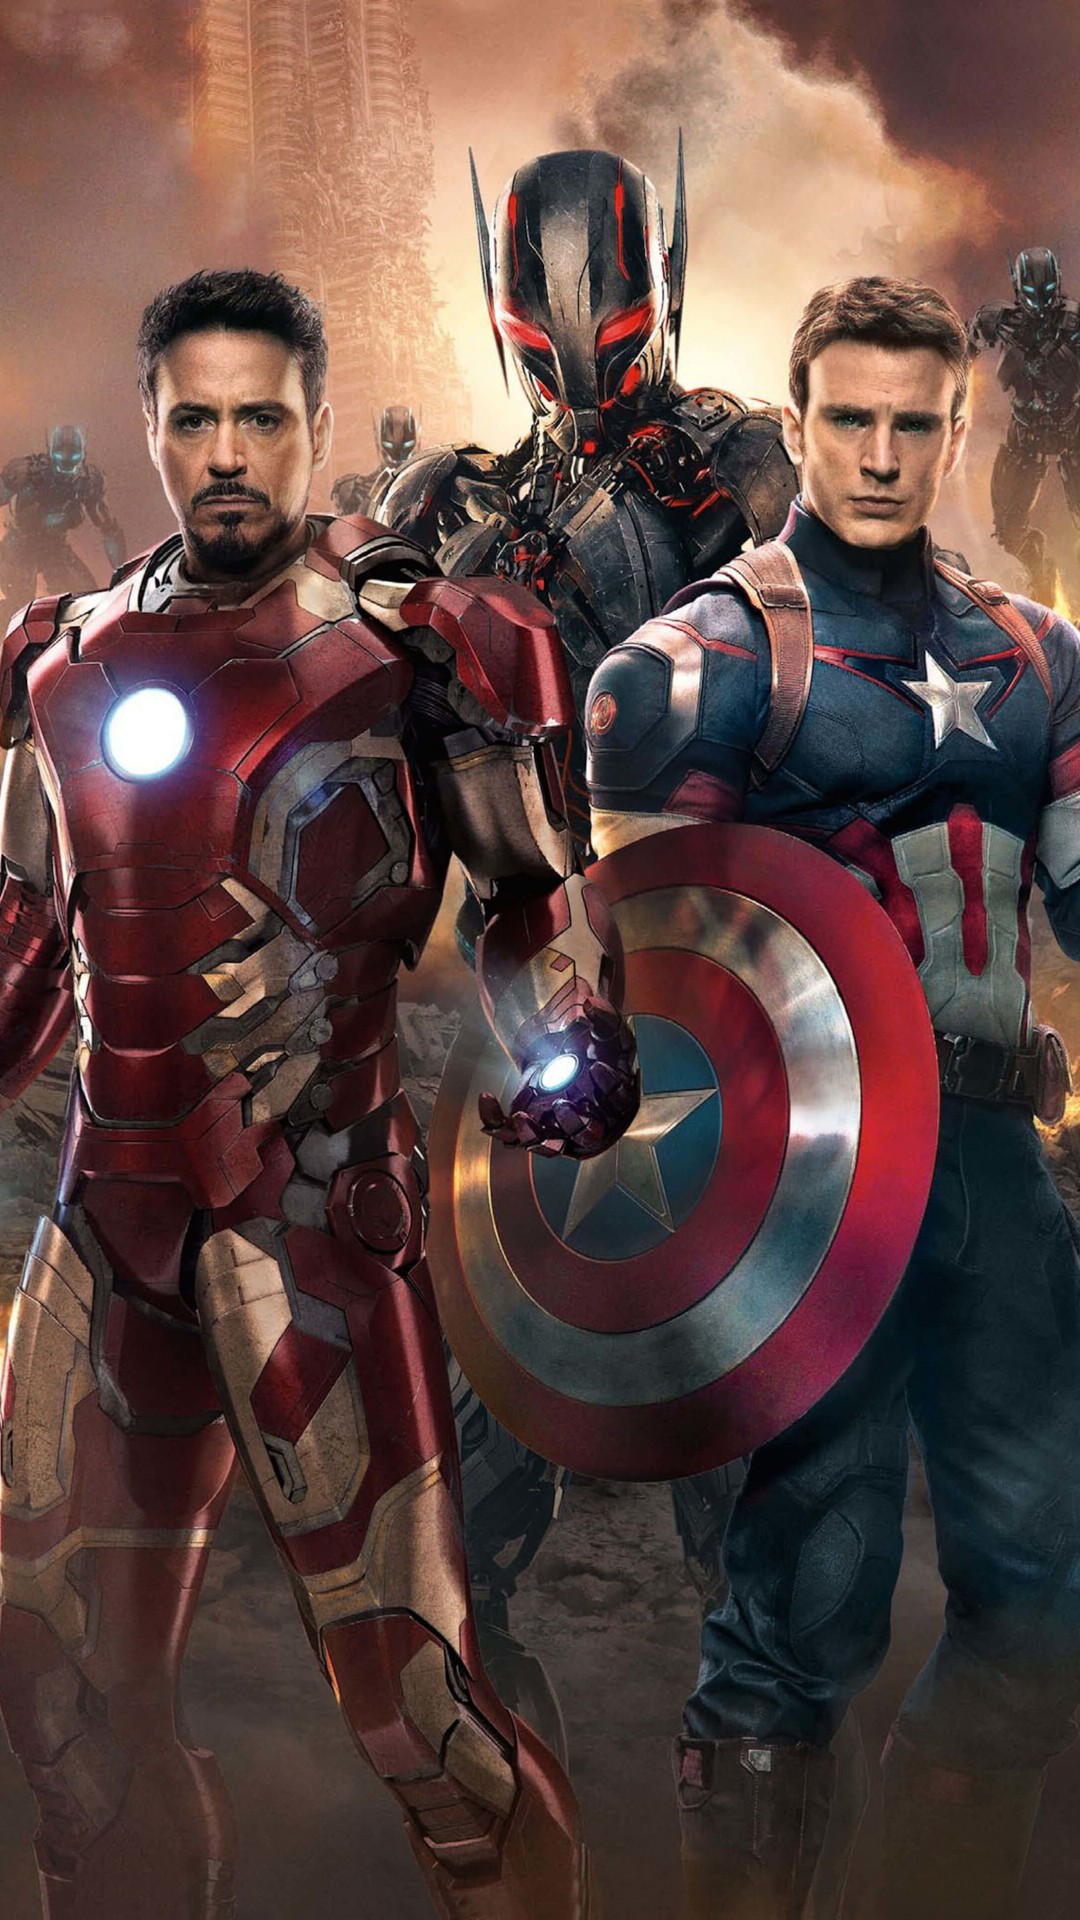 The Avengers: Age of Ultron - Iron Man and Captain America Wallpaper for Google Nexus 5